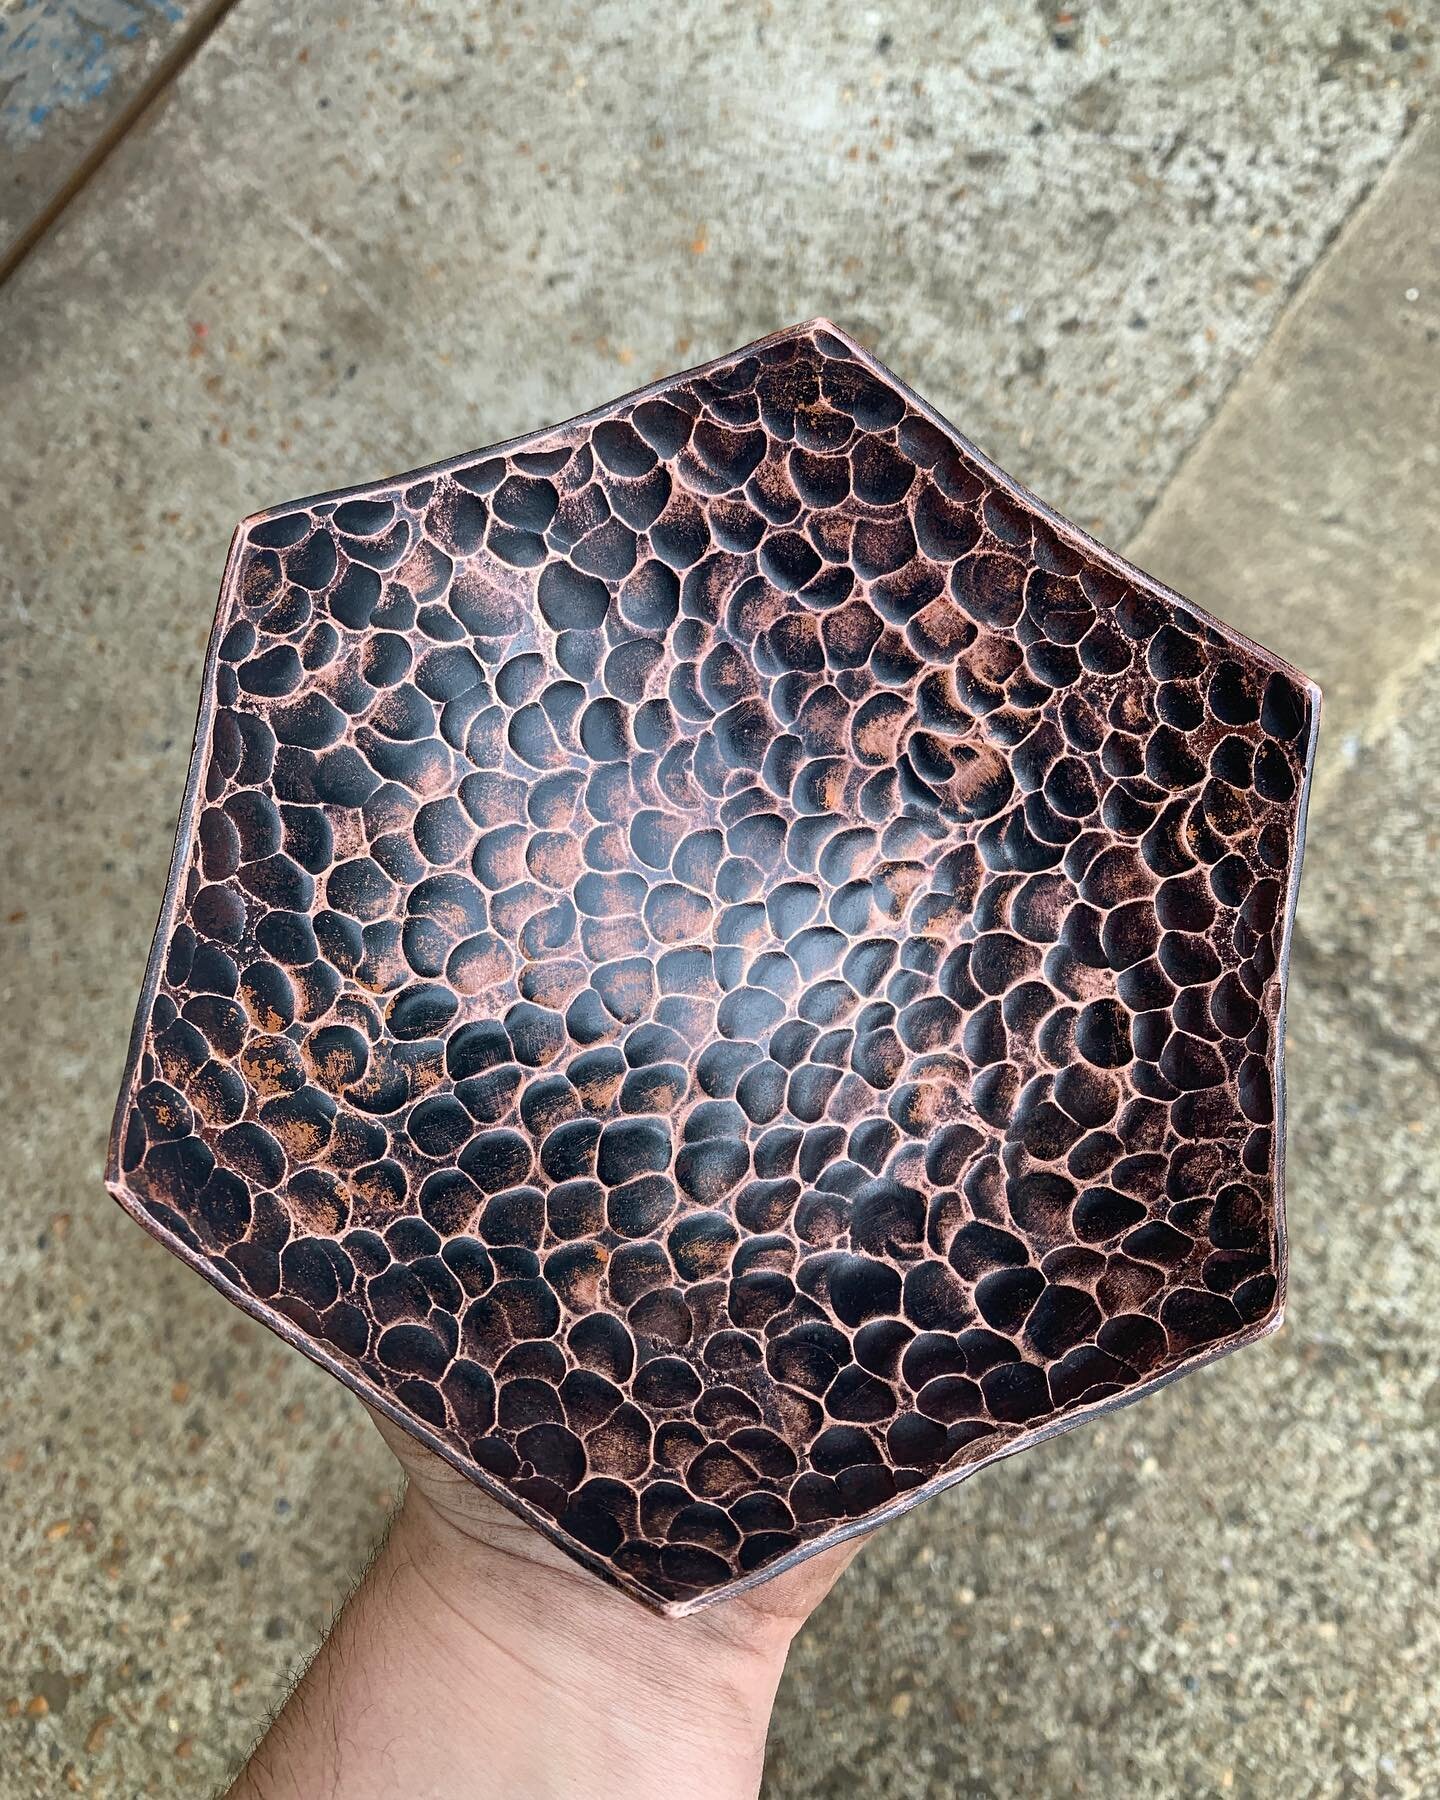 Hammered Copper Bowl with a Fire Patina Finish - Hexagonal 

Beautiful finish on this Copper Bowl. 
Available Now!

Follow ➡️ @j.r.r.artistblacksmith 

#copper #copperdesign #copperbowl #copperdish #copperpatina #patina #handmadebowl #handmadebowls #